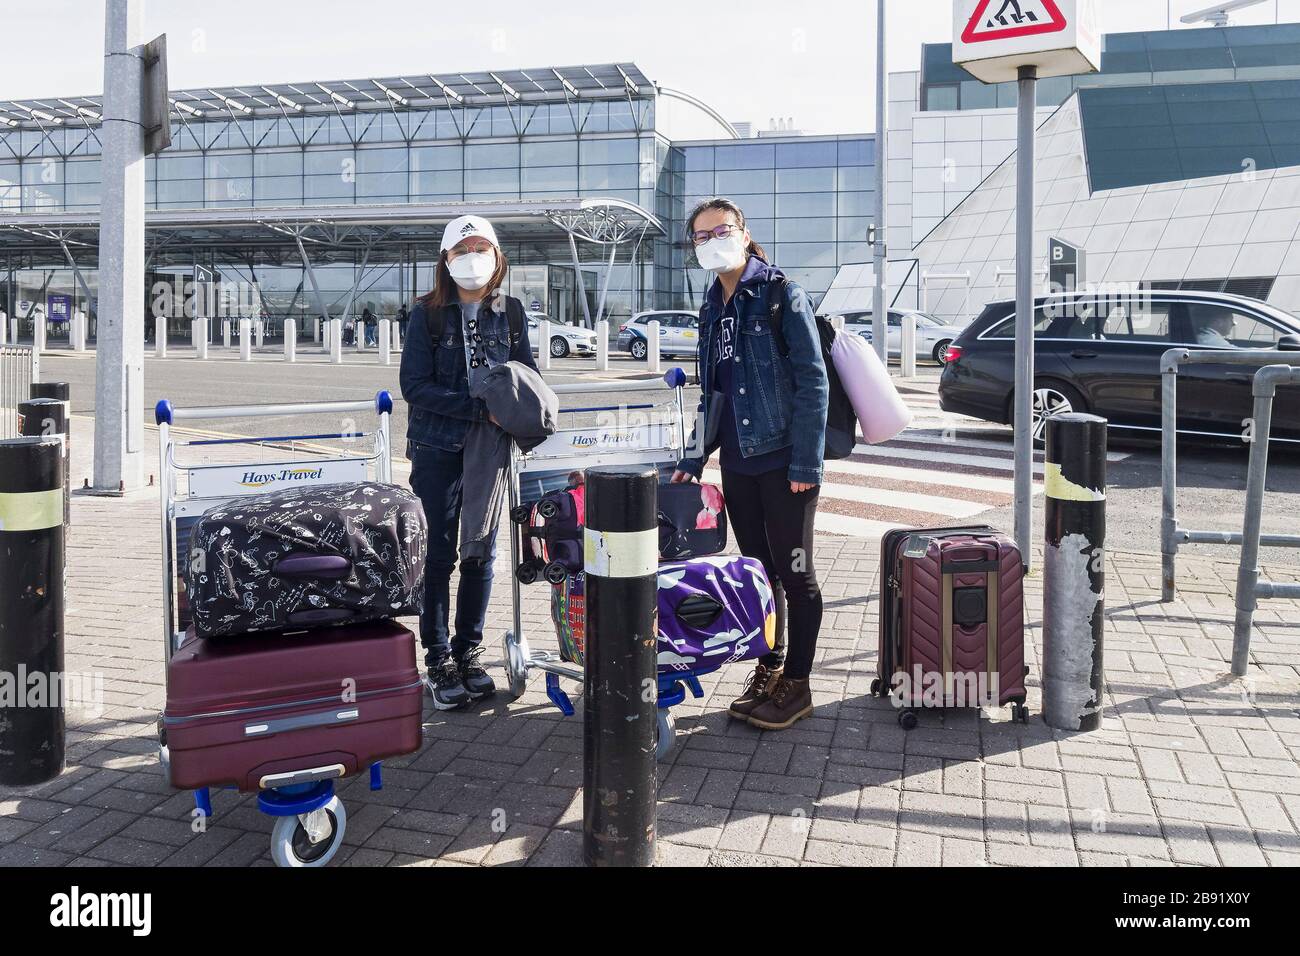 Newcastle uon Tyne, UK, 23rd March 2020. Newcastle University students don masks to fly home after courses suspended due to corvid-19 coronavirus. Joseph Gaul/alamy News Stock Photo